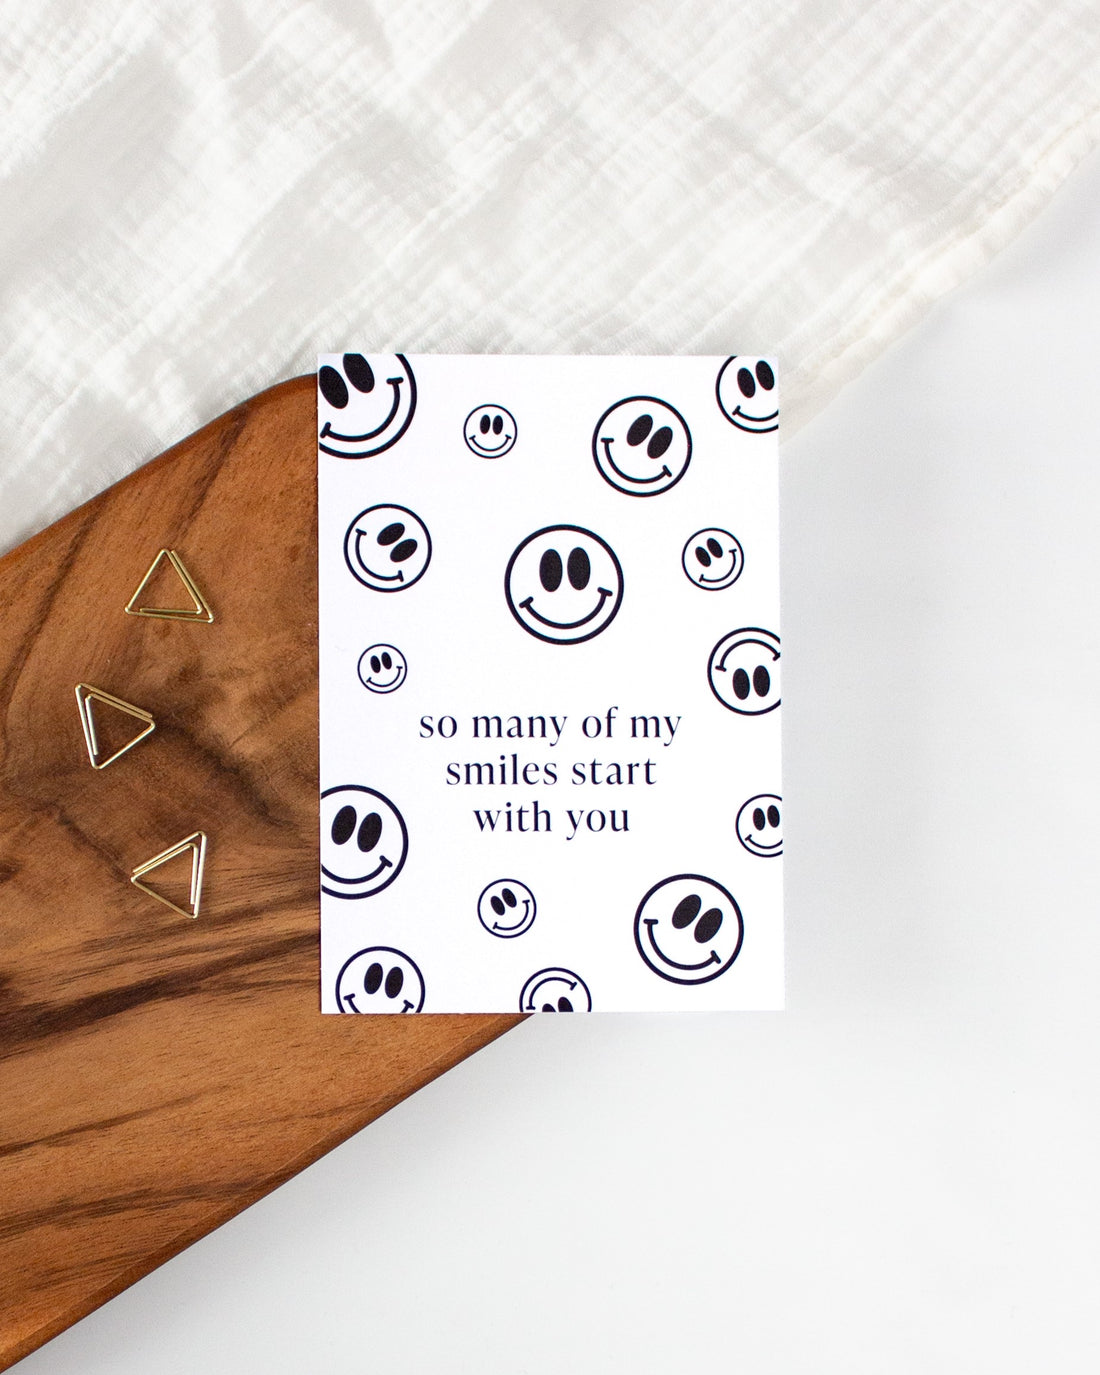 A white postcard laying on a wooden board with some golden triangle paperclips and a white cloth in the background. The postcard is covered in black smiley faces of varying sizes with some text in the middle saying &quot;so many of my smiles start with you&quot;.